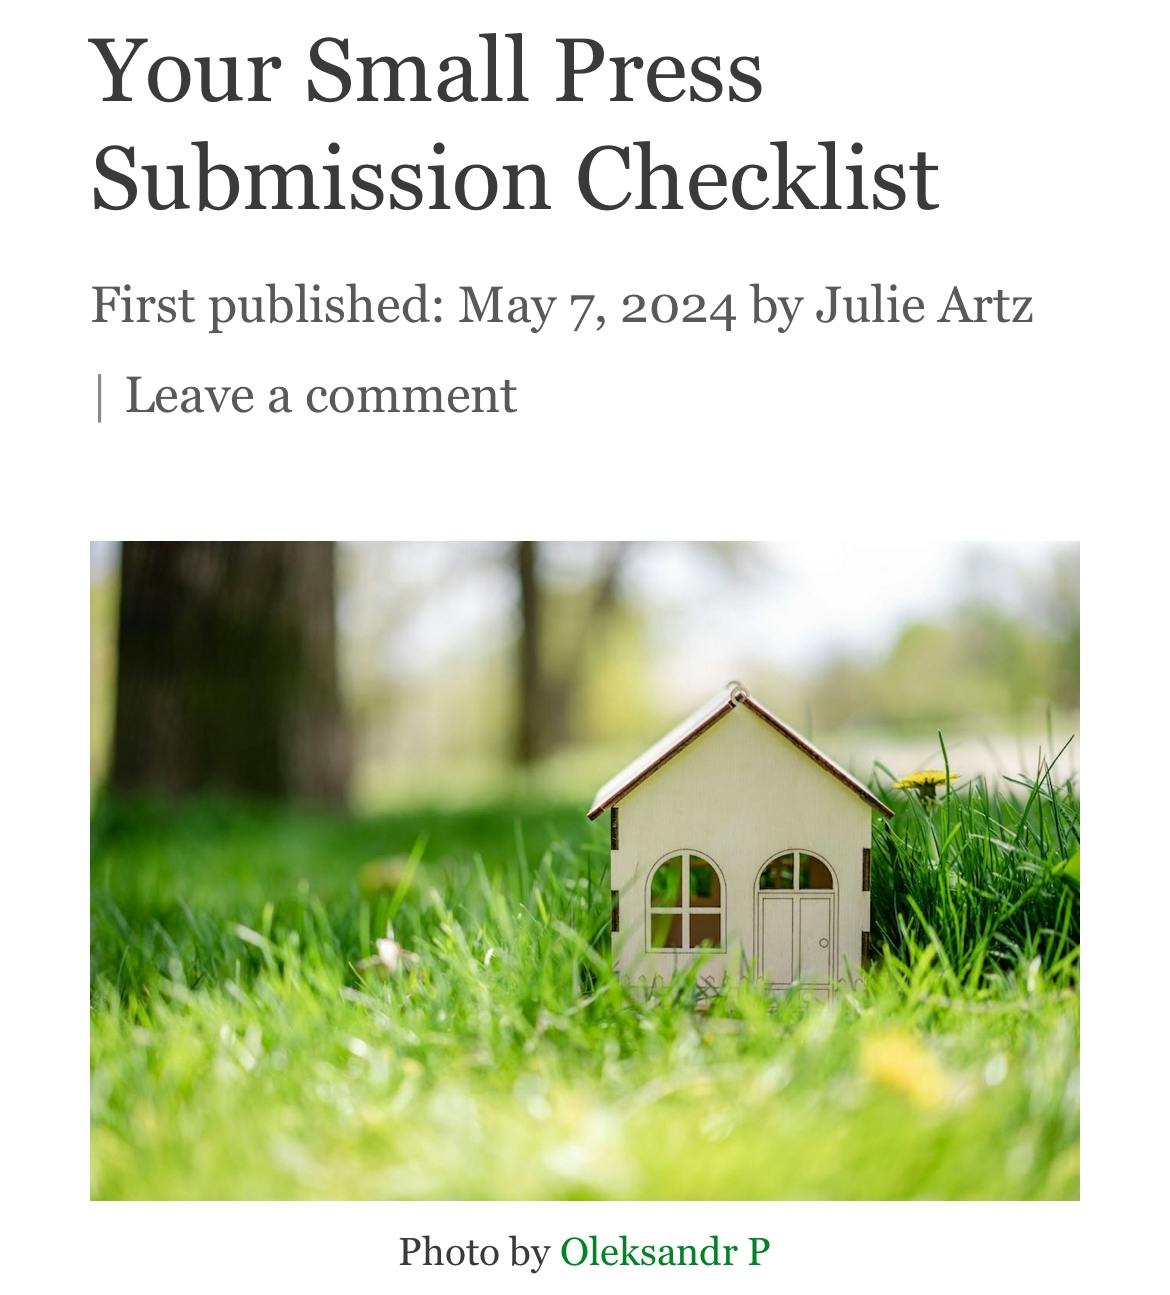 Your Small Press Submission Checklist by Julie Artz